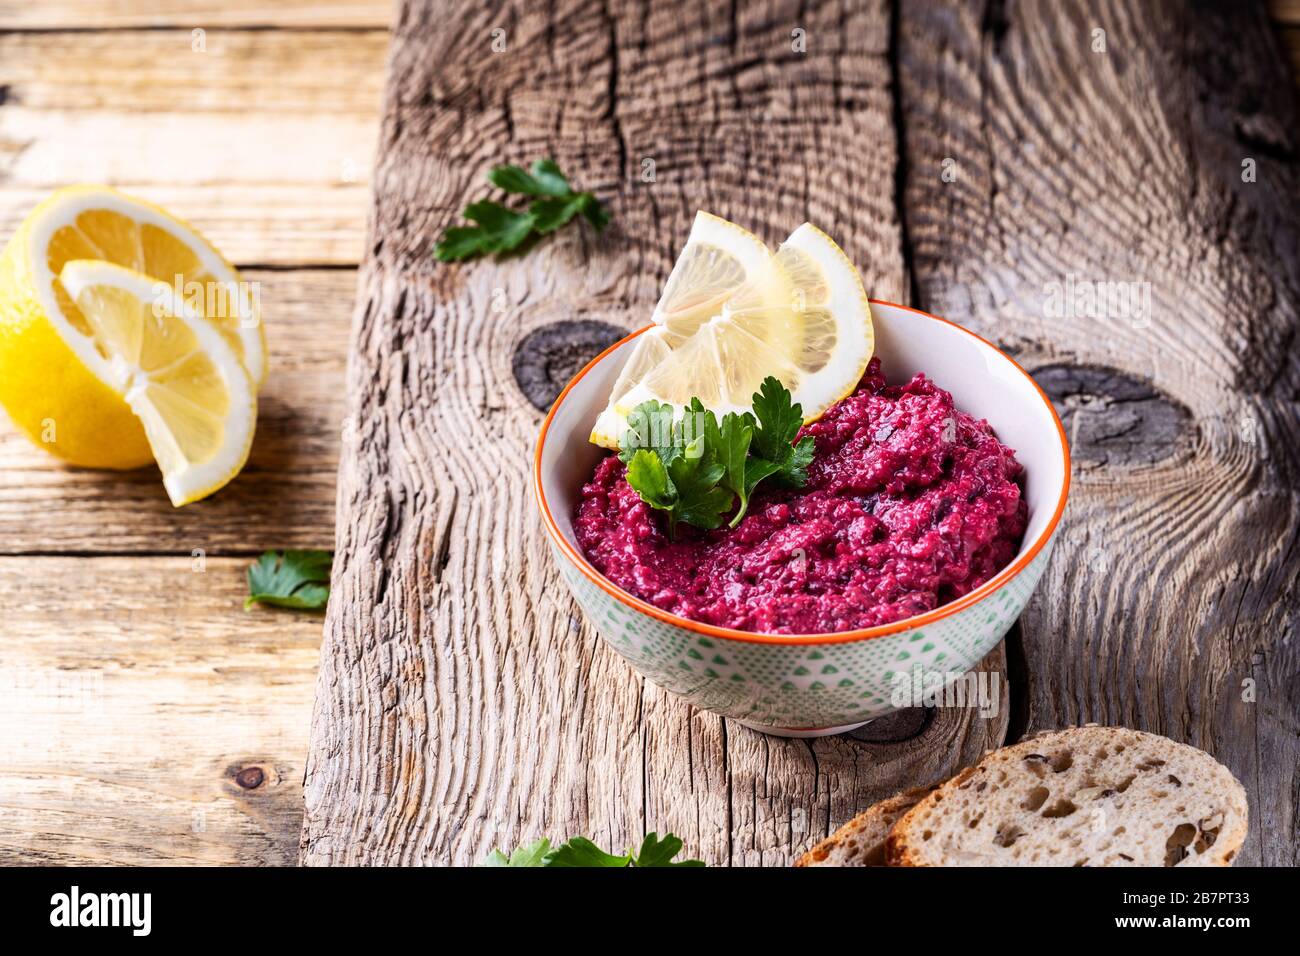 Beetroot hummus with horseradish and lemon juice, served on plate with fresh parsley herbs and whole grain seeded bread on rustic wooden table, plant Stock Photo